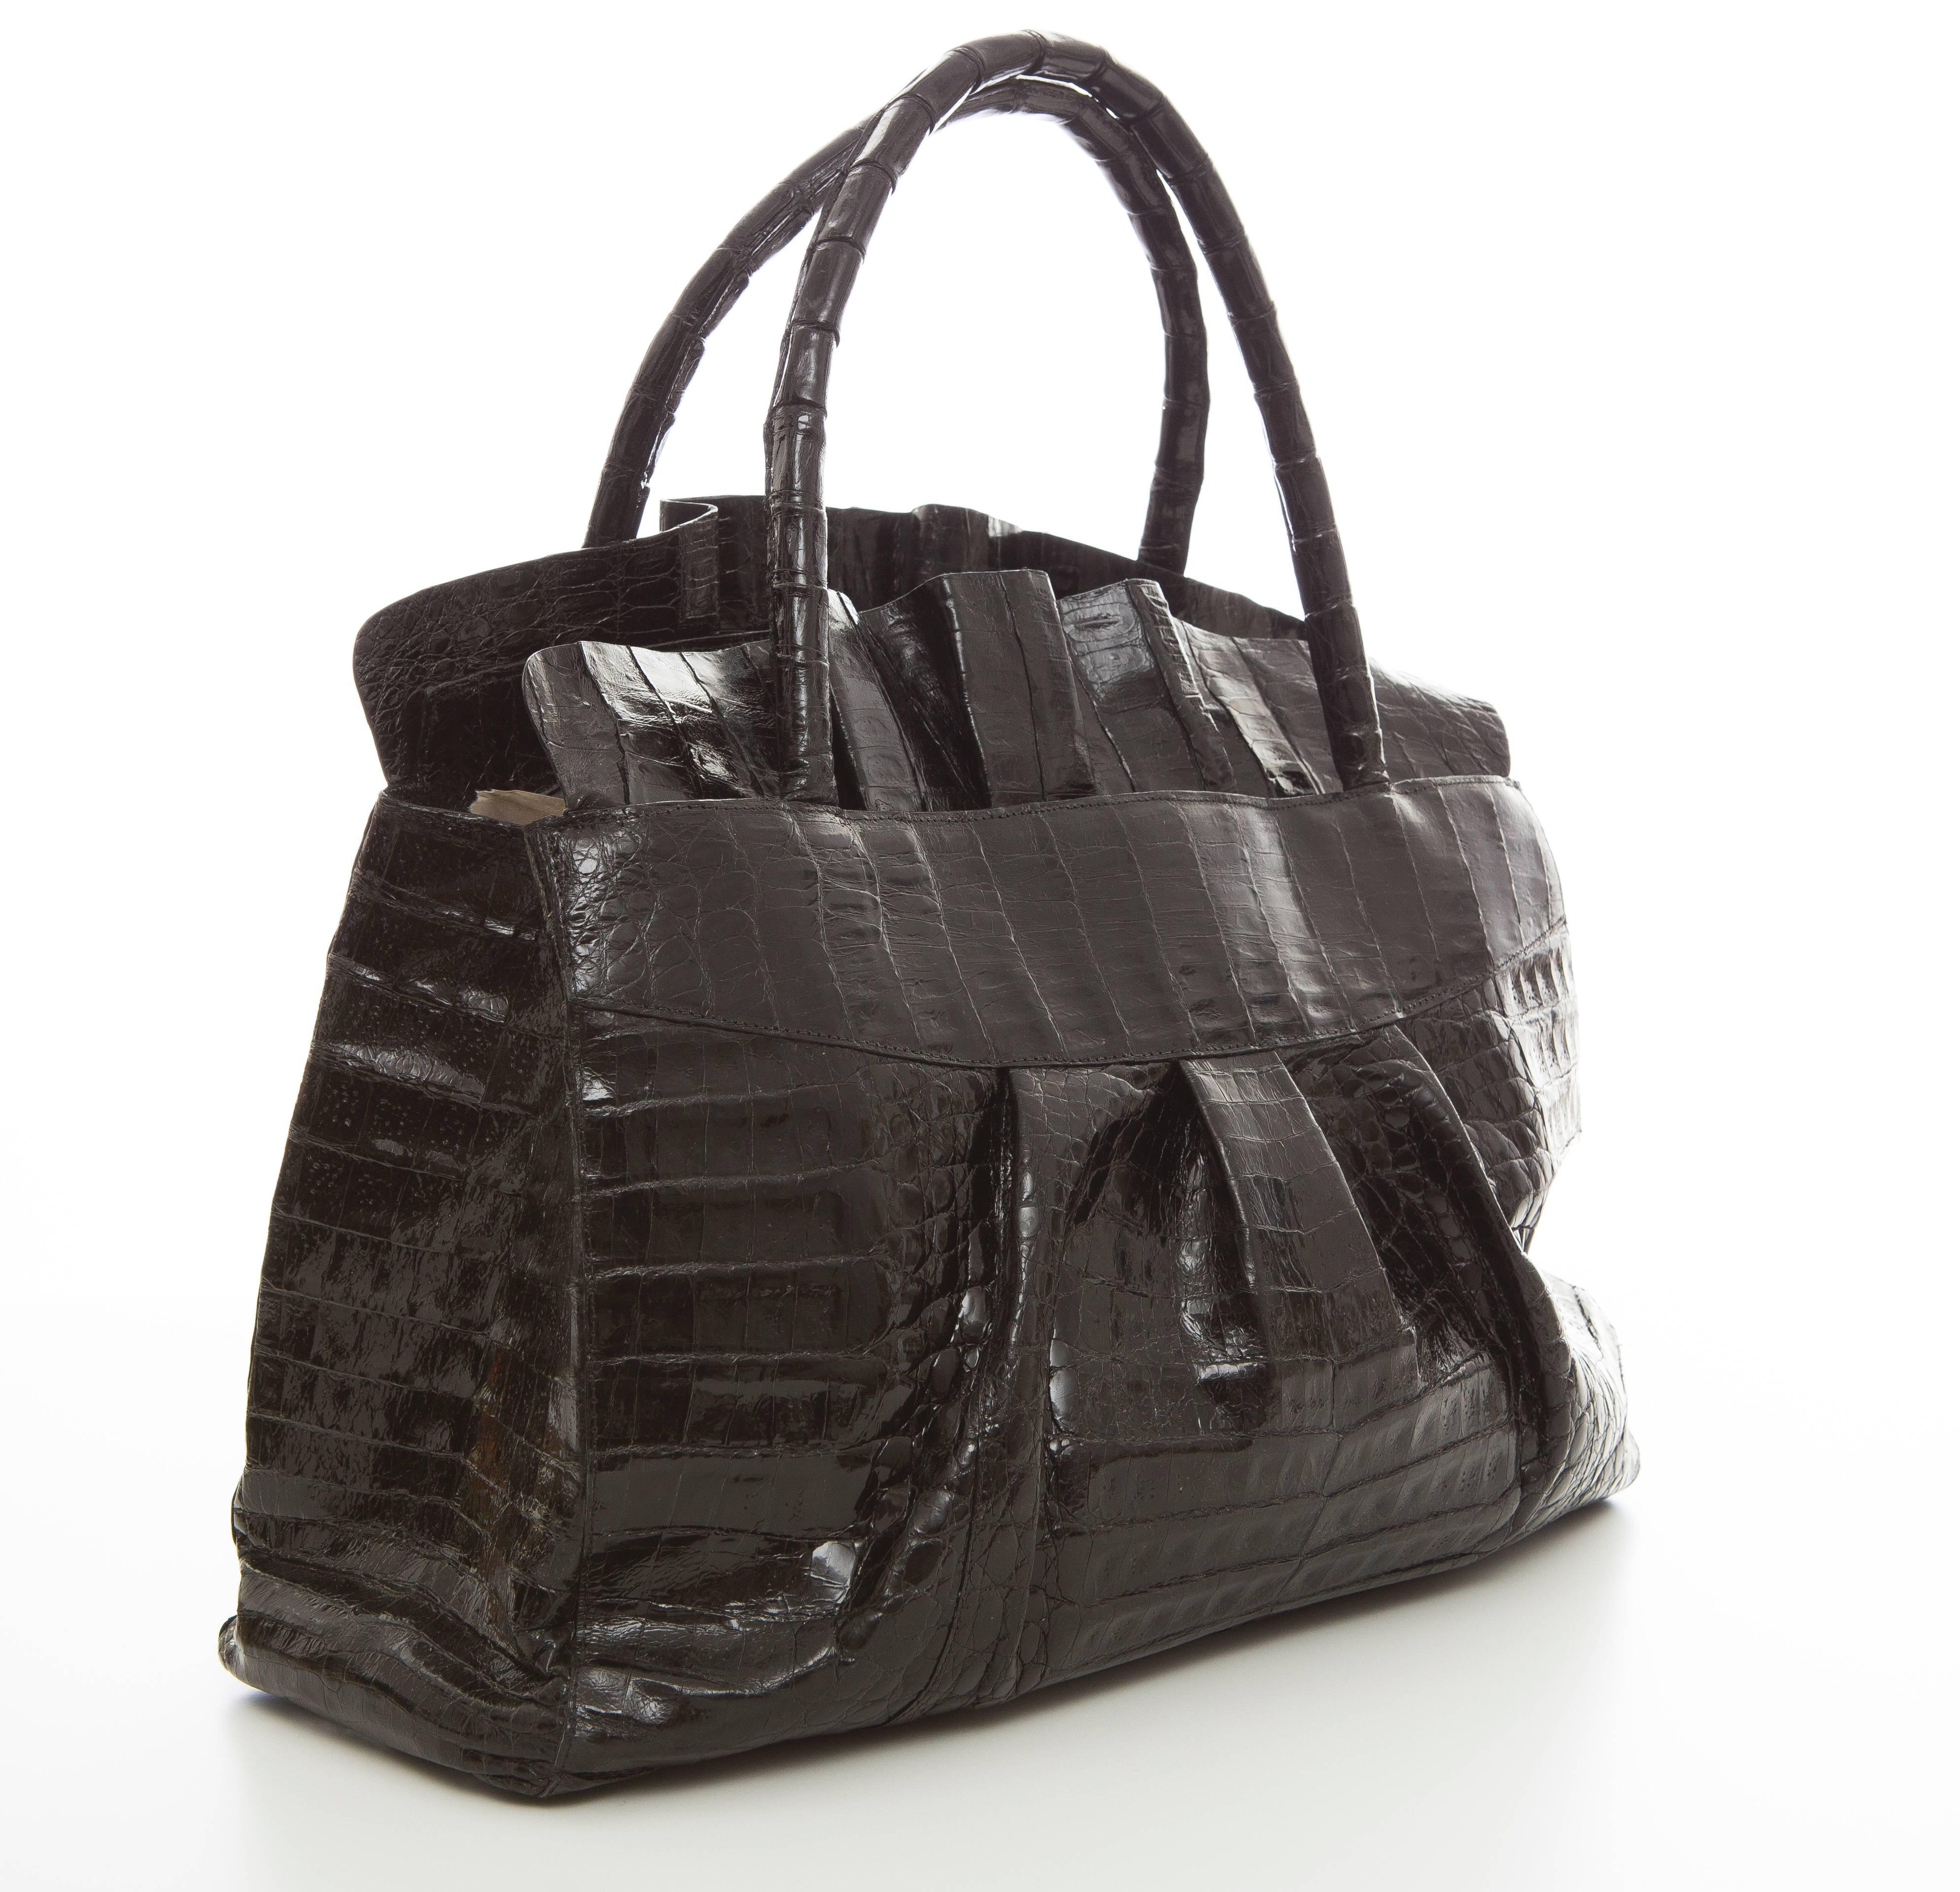 Nancy Gonzalez shiny black medium crocodile ruffle tote,dual rolled handles, two interior zip pockets, three interior pouch pockets, burgundy suede interior, magnetic flip top closure, five alligator covered feet for protection and optional shoulder